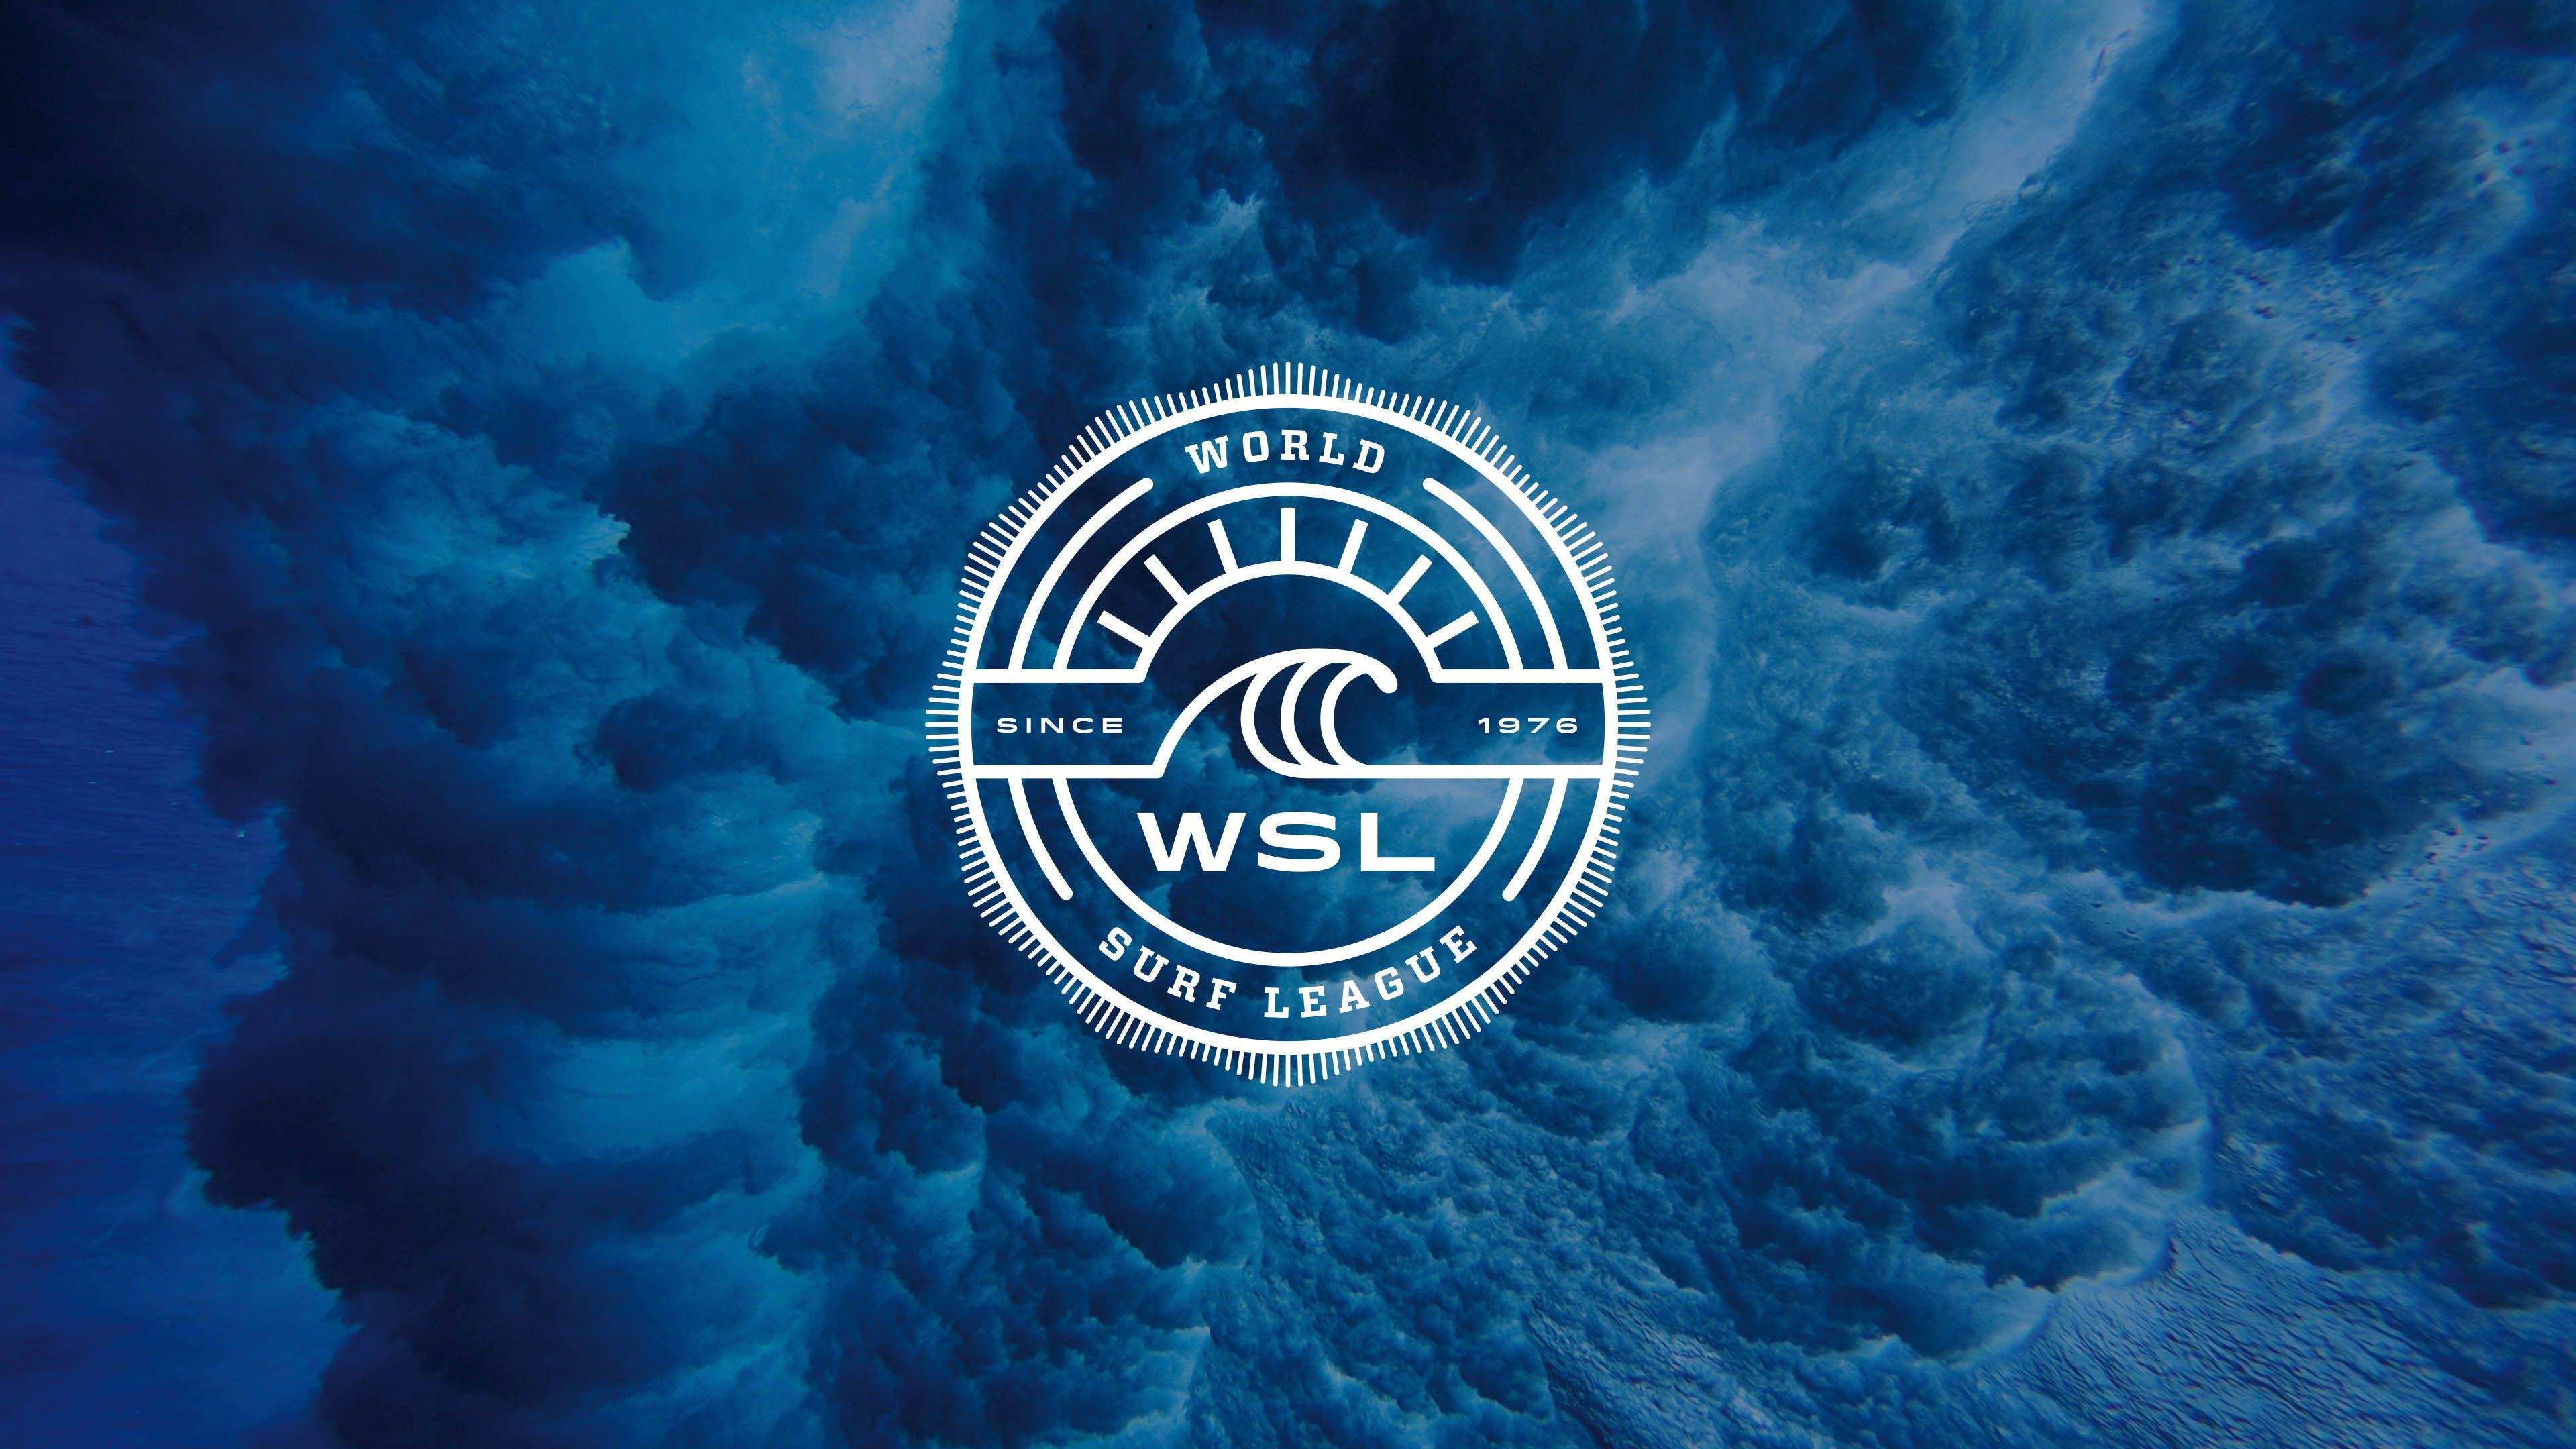 World Surf League Logo - Design, branding and creative direction for the World Surf League by ...